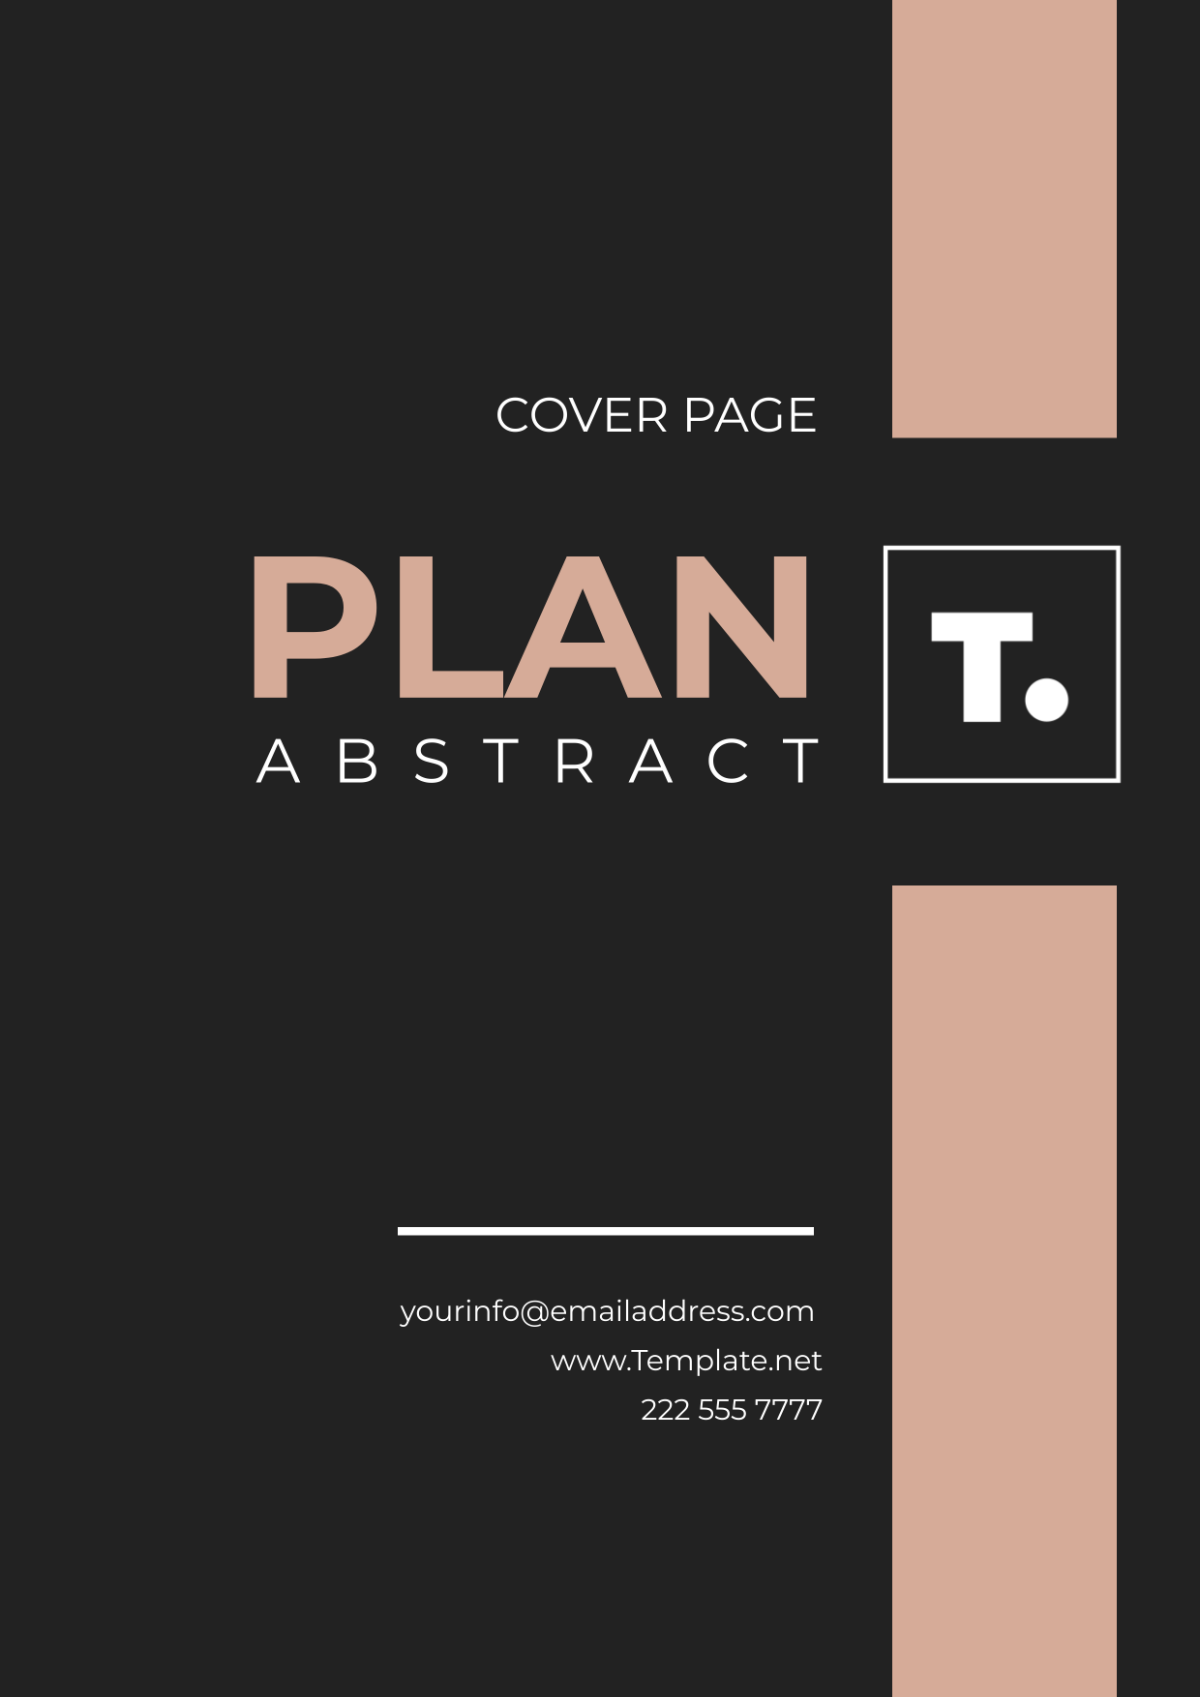 Plan Abstract Cover Page Template